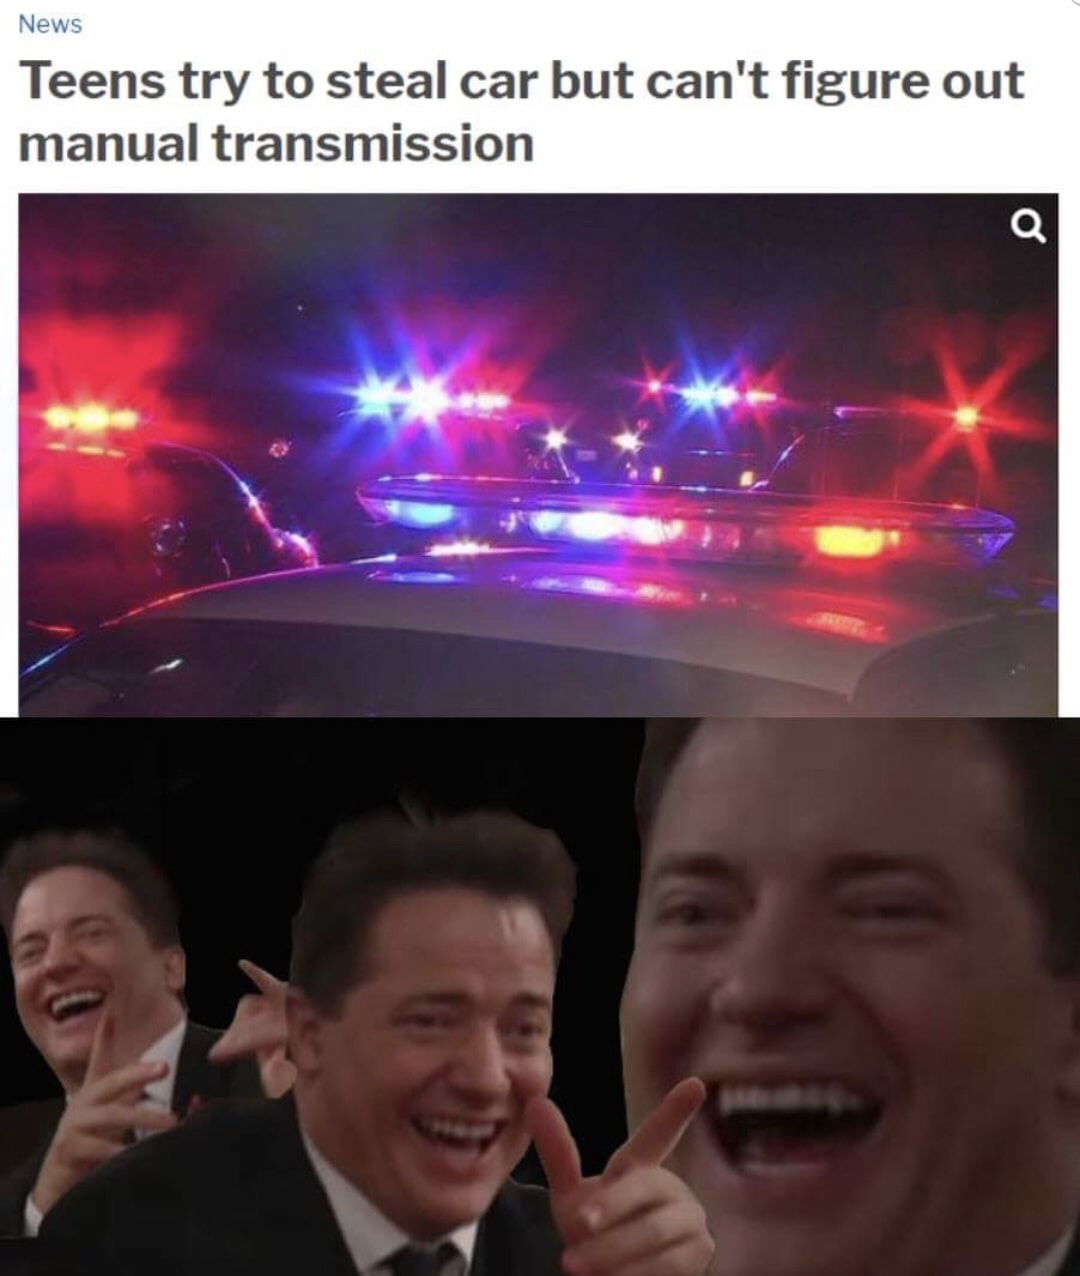 brendan fraser meme - News Teens try to steal car but can't figure out manual transmission